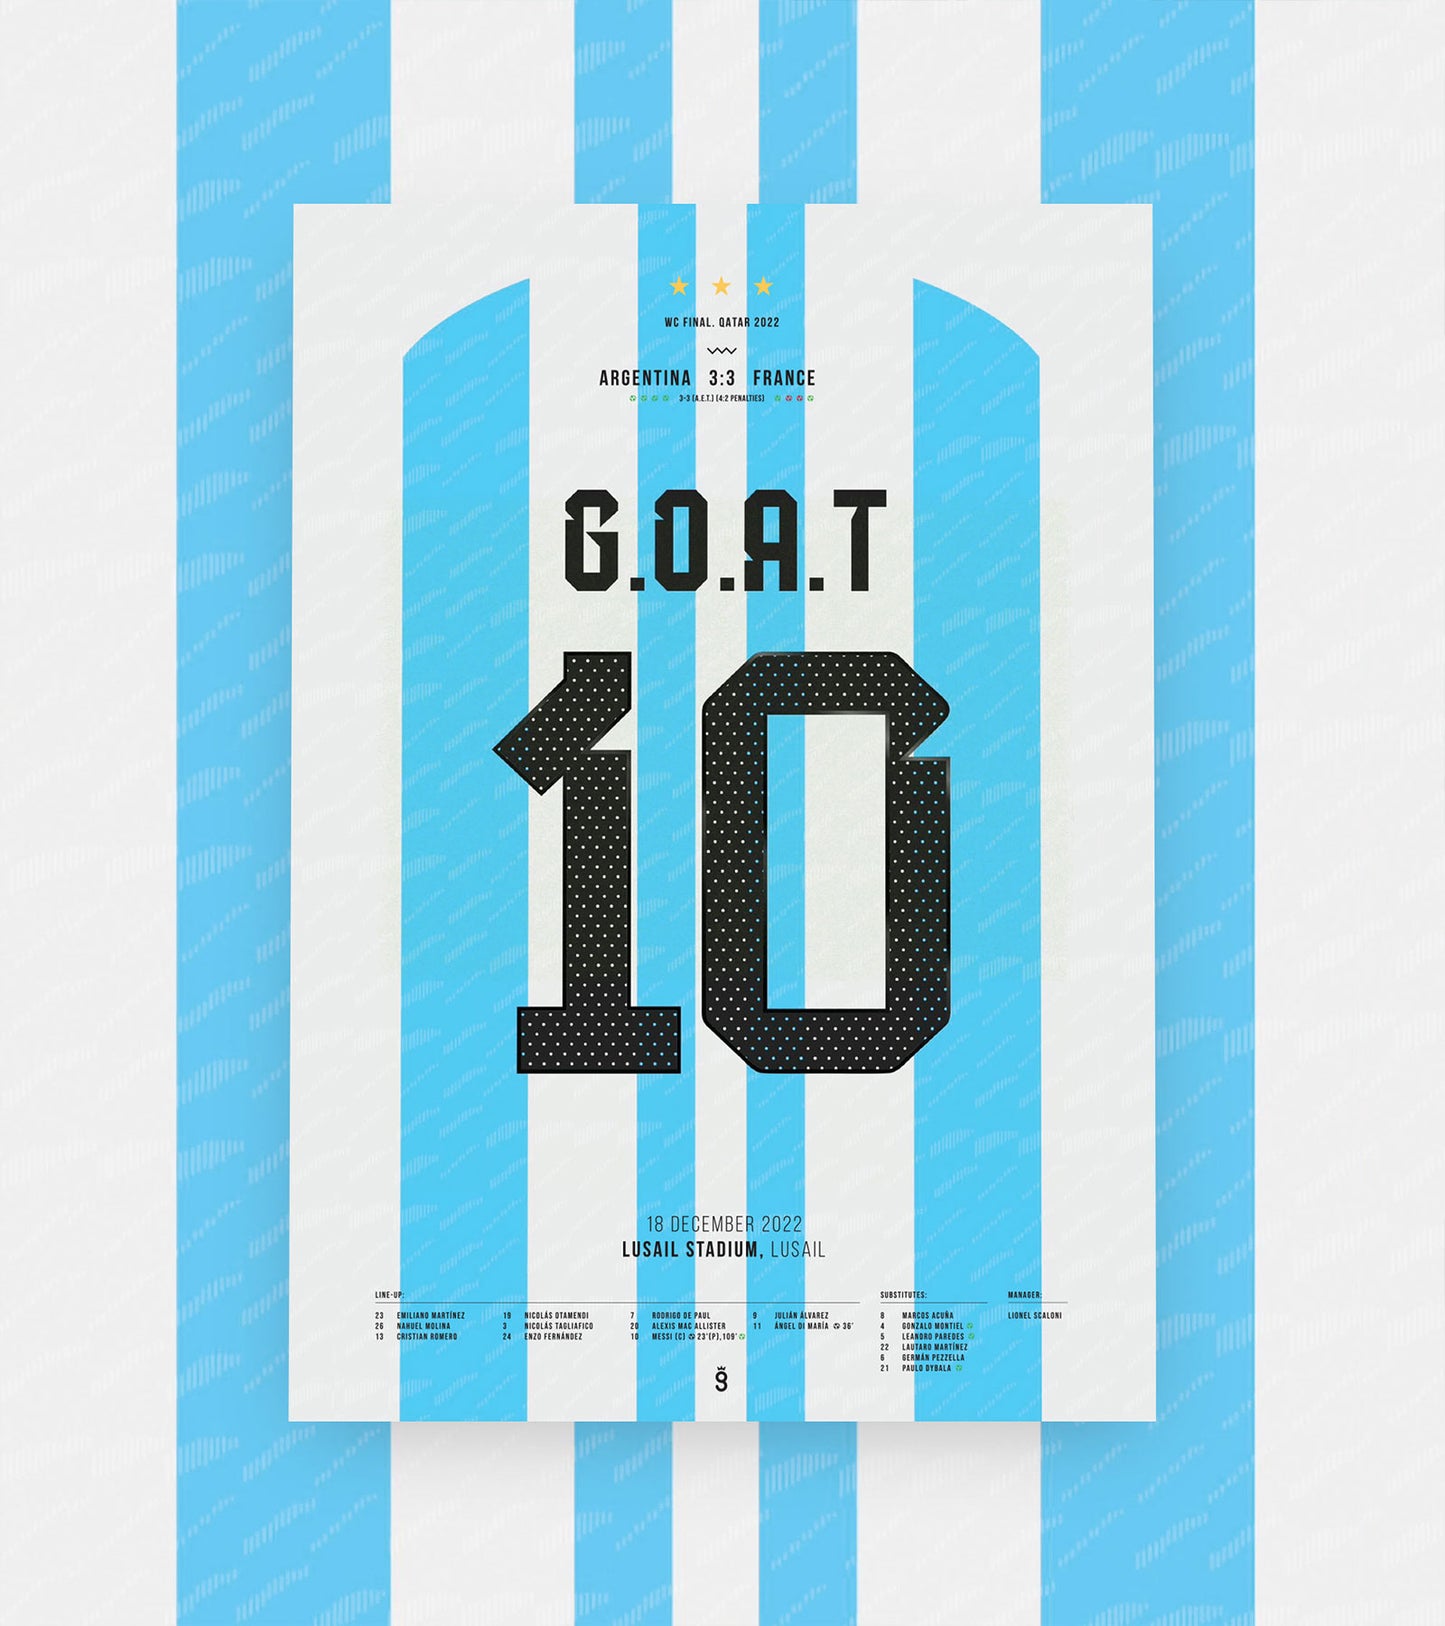 The Day that Messi Became the G.O.A.T.